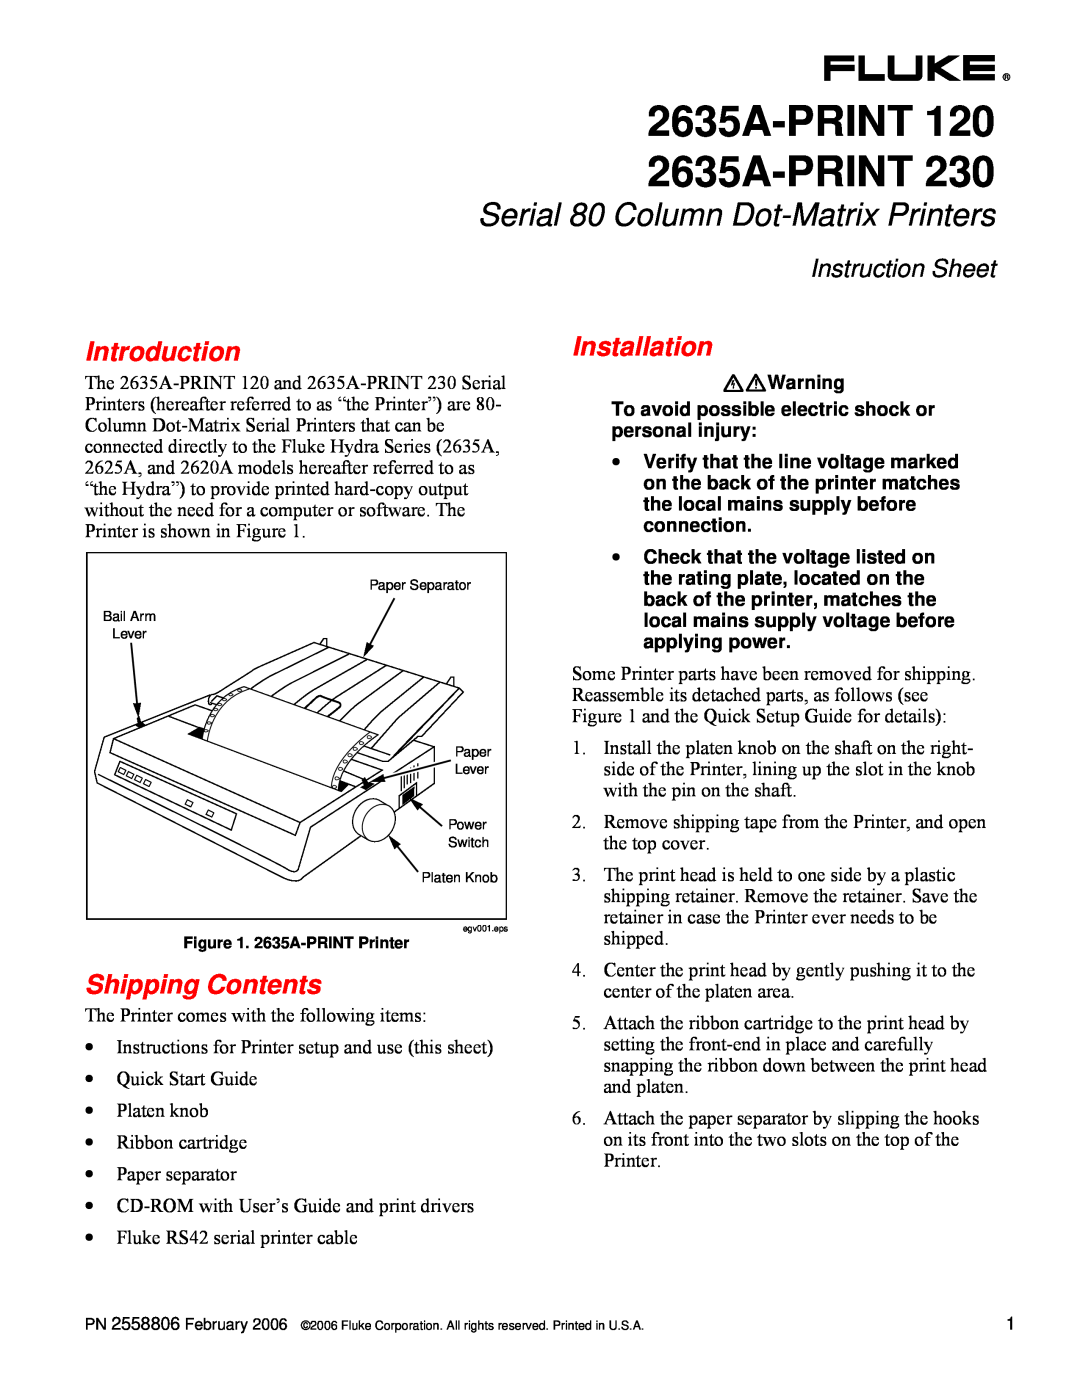 Fluke 2635A-PRINT 120 instruction sheet Introduction, Installation, Shipping Contents, 2635A-PRINT120 2635A-PRINT230 